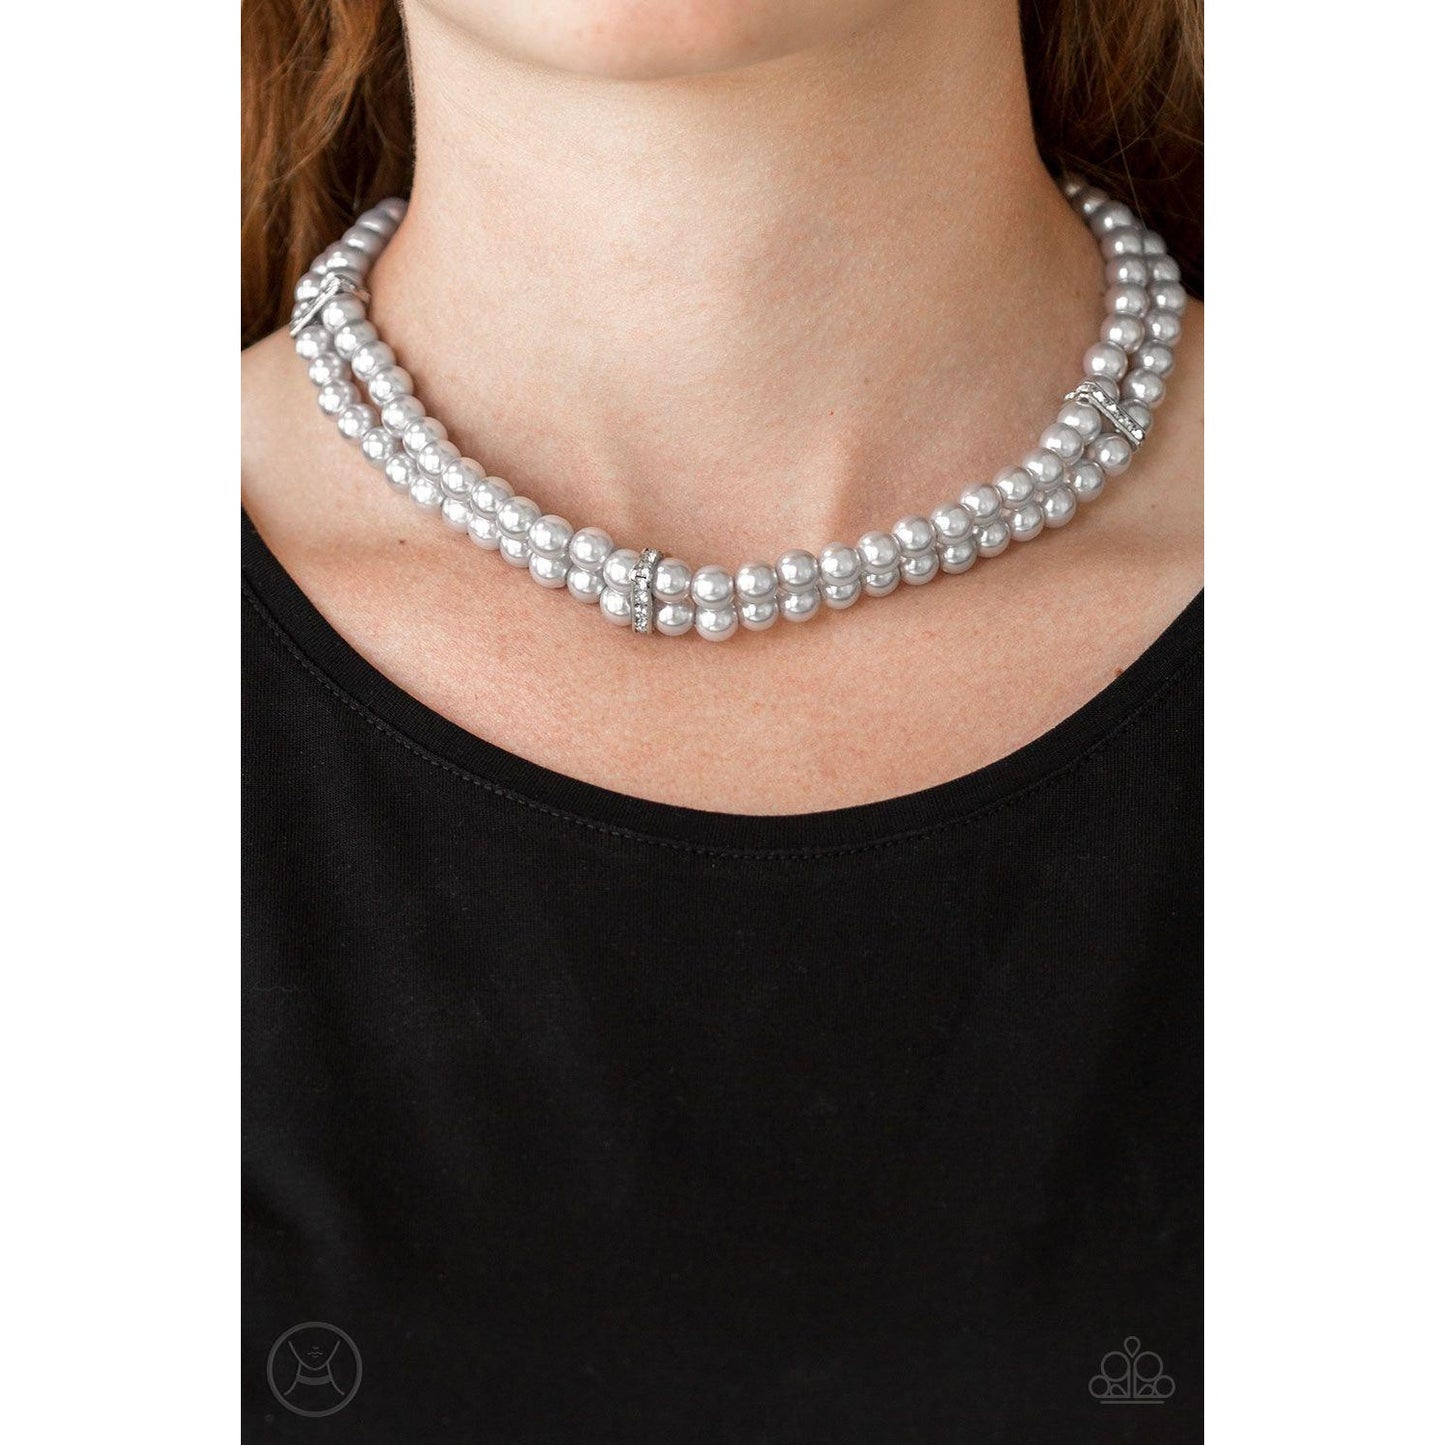 Put On Your Party Dress - Silver Necklace 2148